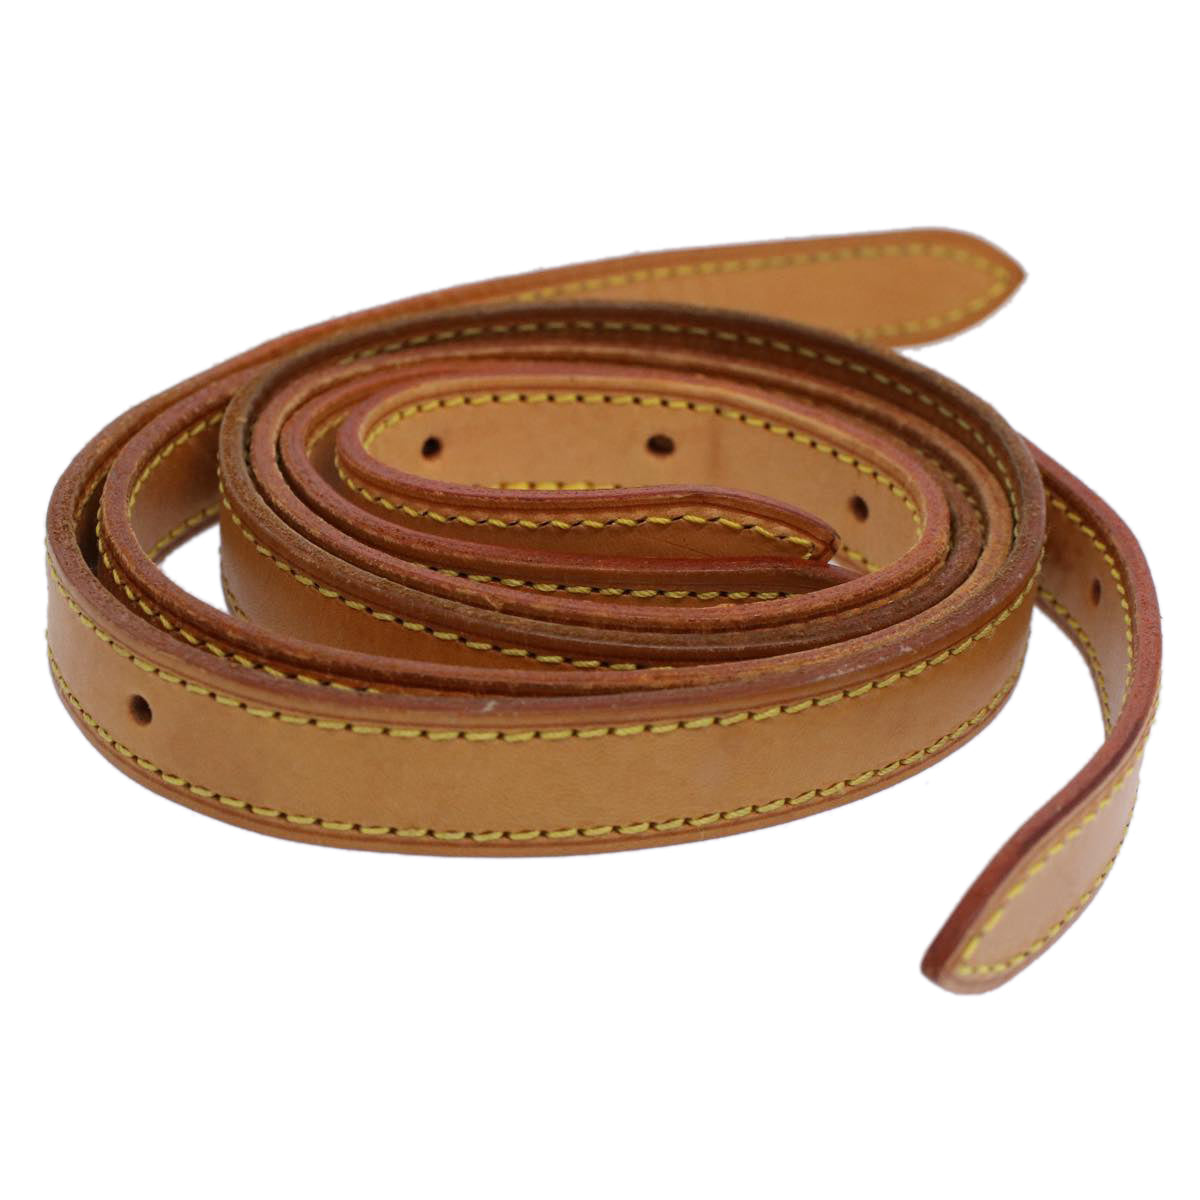 LOUIS VUITTON Shoulder Strap Bucket for GM Leather 21.7""-27.6"" LV Auth bs9317 - 0